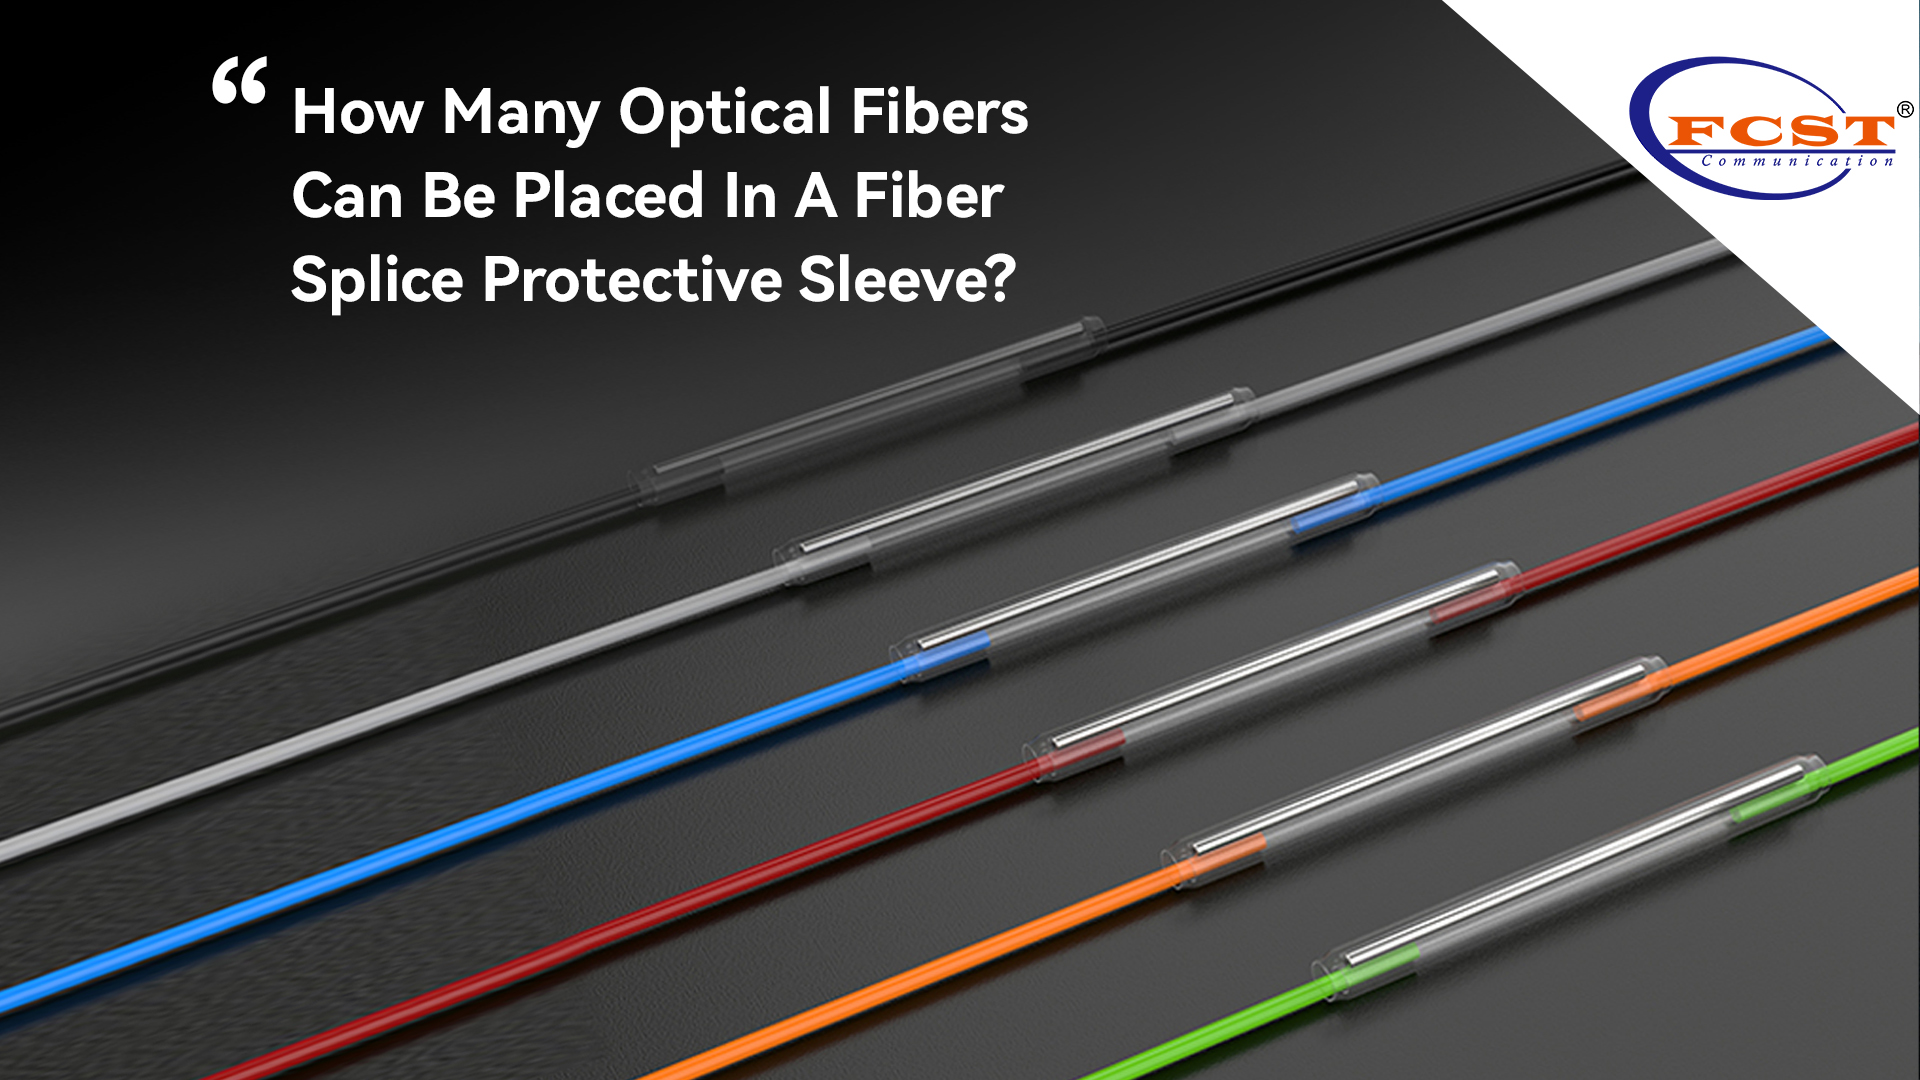 How Many Optical Fibers Can Be Placed In A Fiber Splice Protective Sleeve?